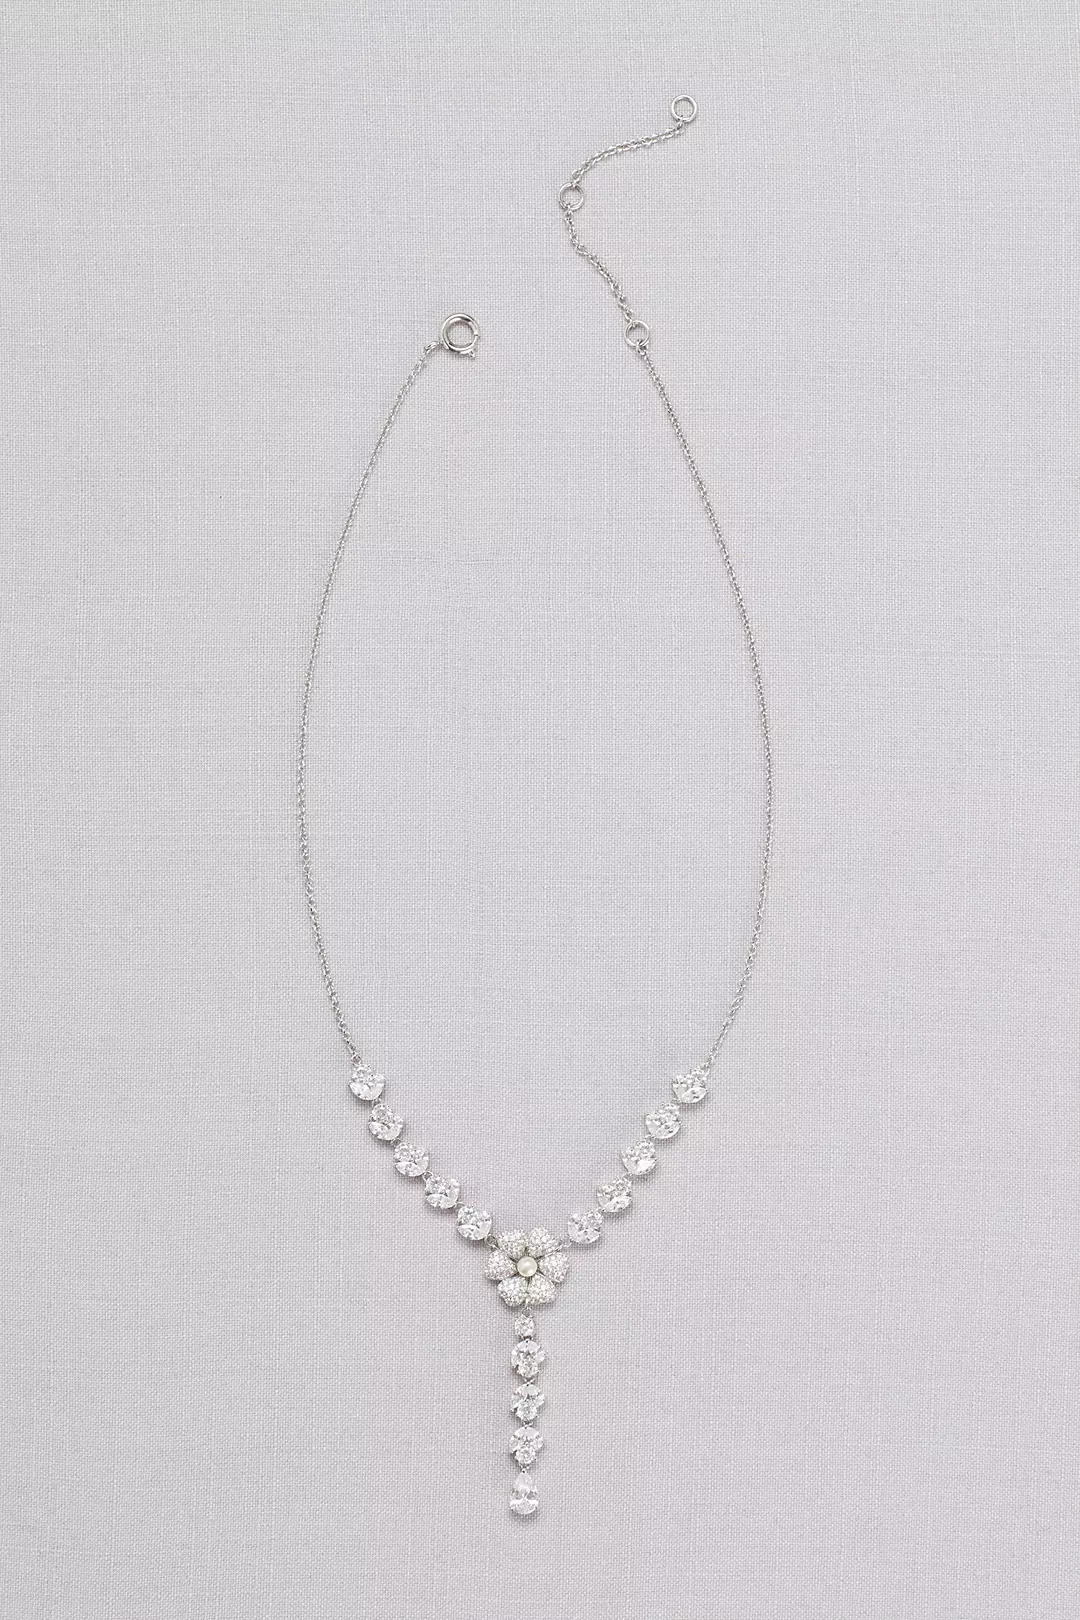  Y-Neck Crystal-Dusted Flower Necklace Image